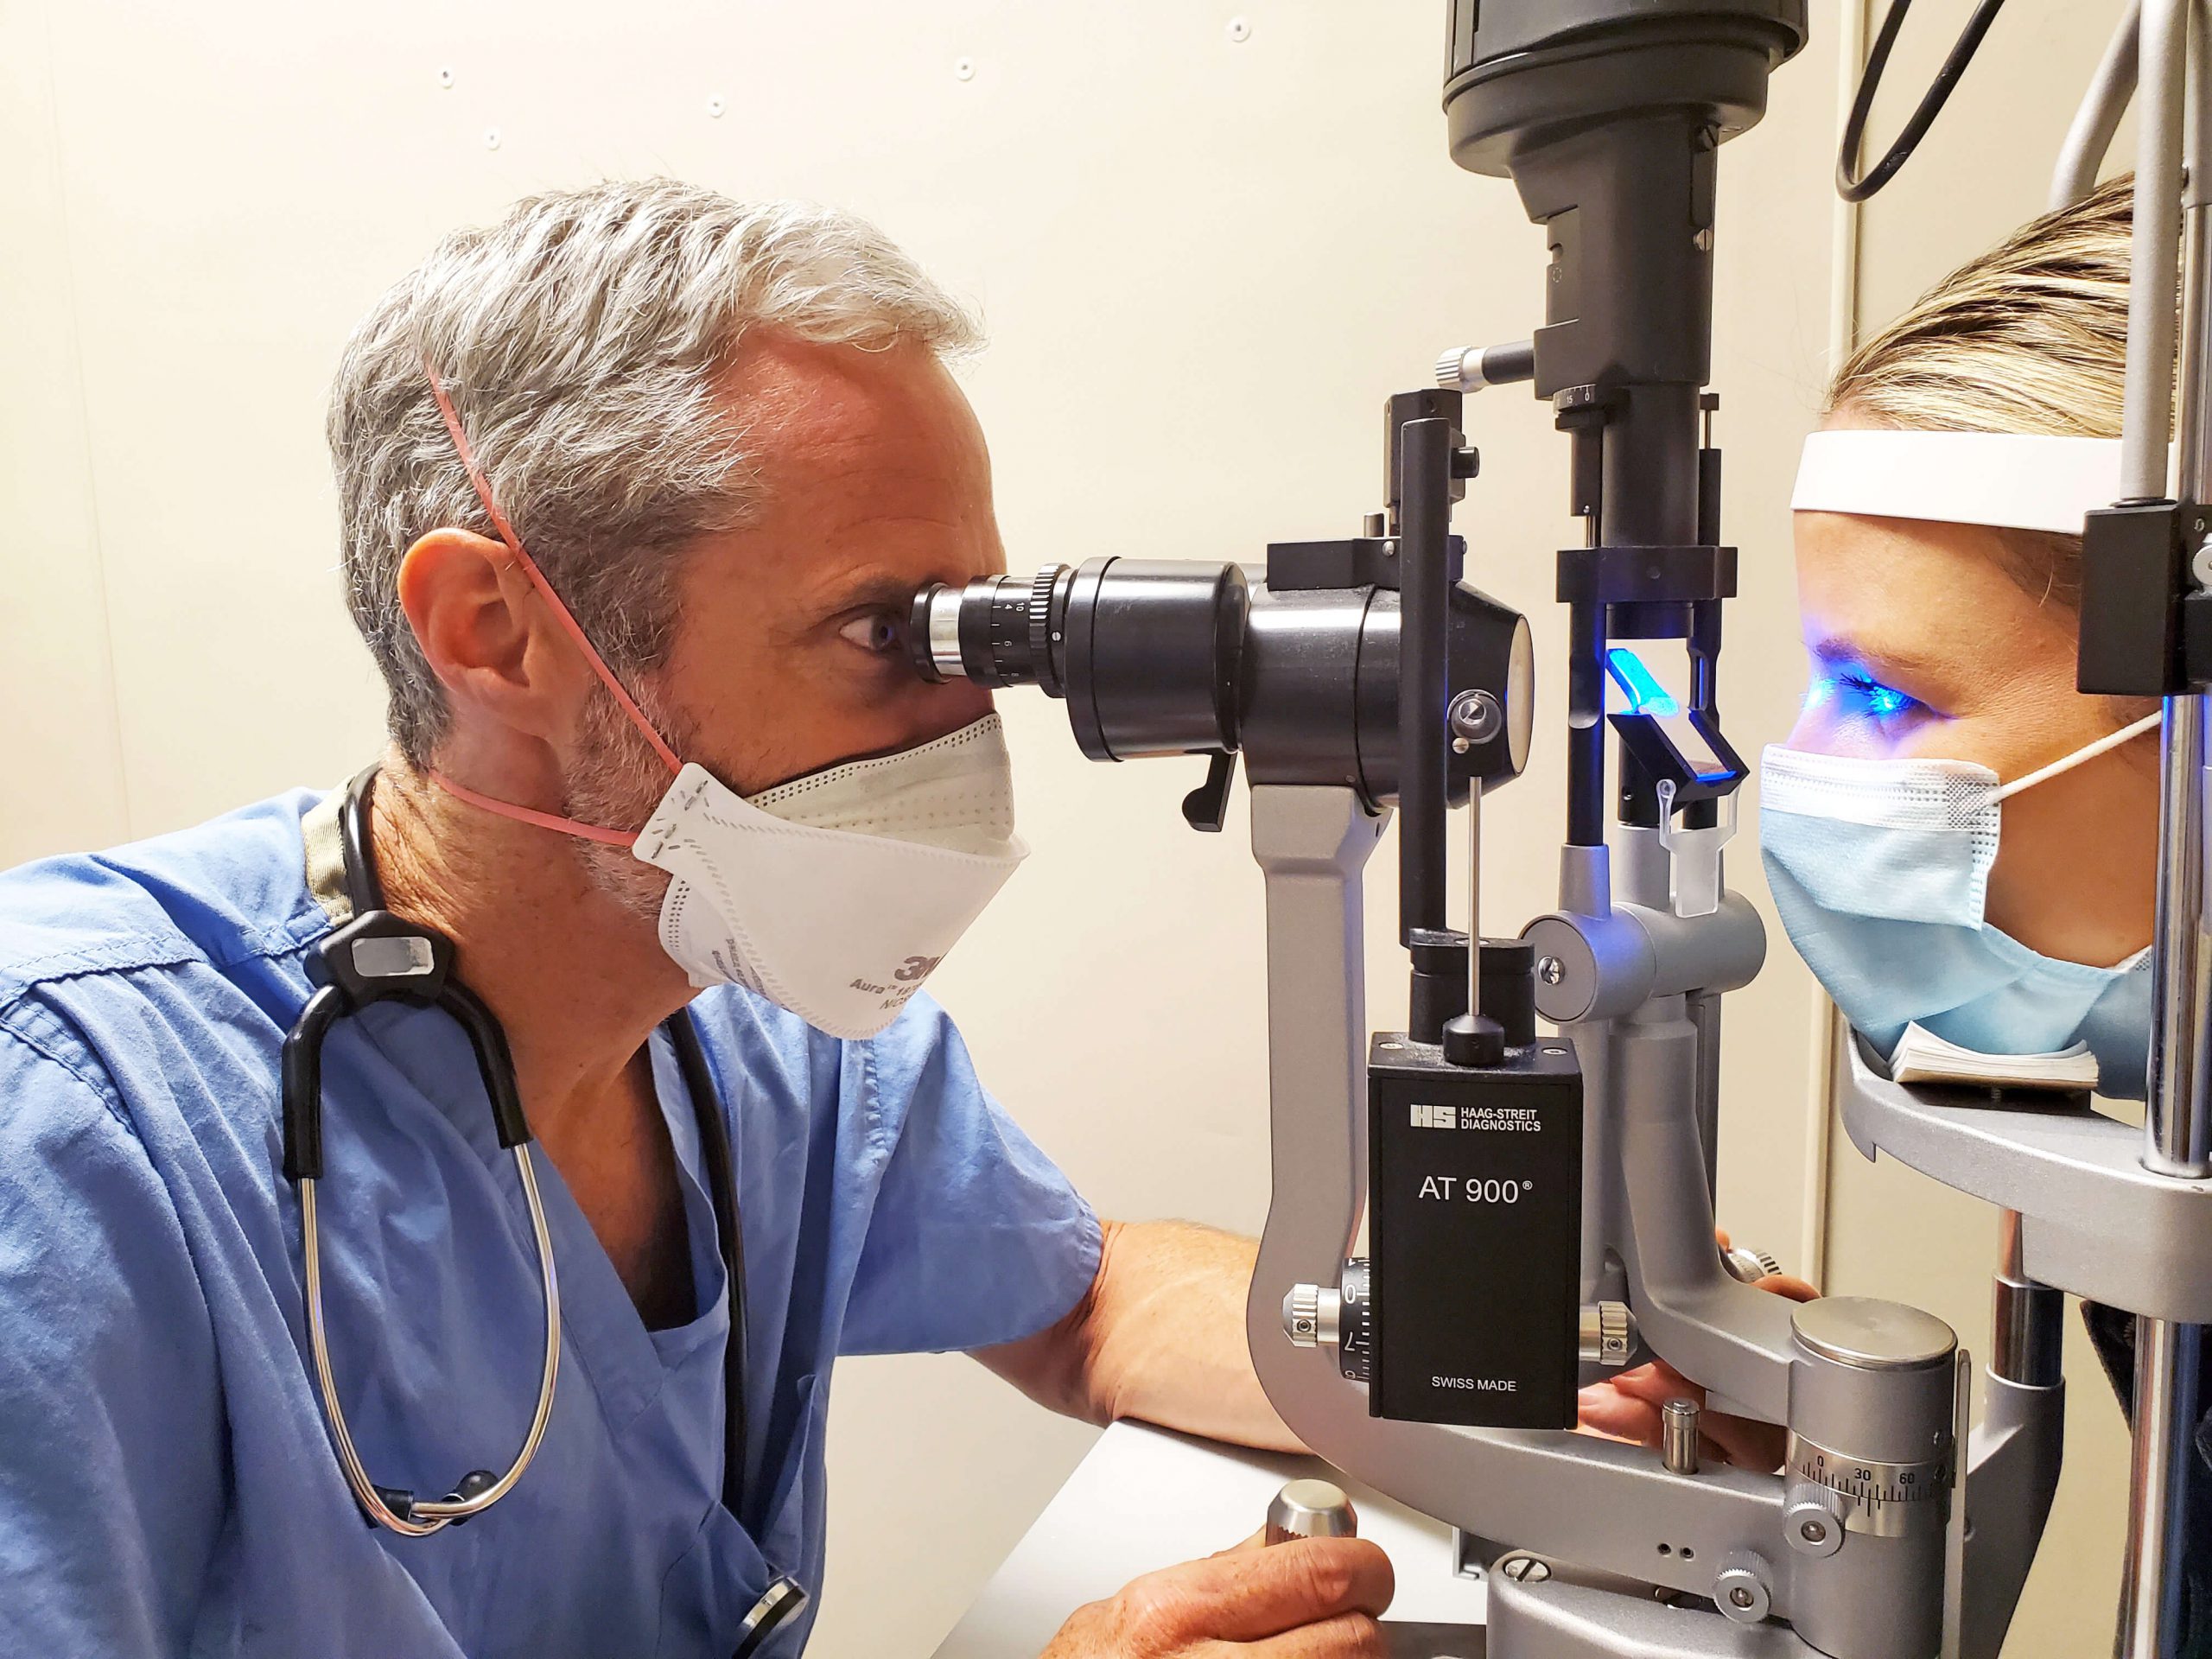 A doctor examines a patient's eyes using a slit lamp